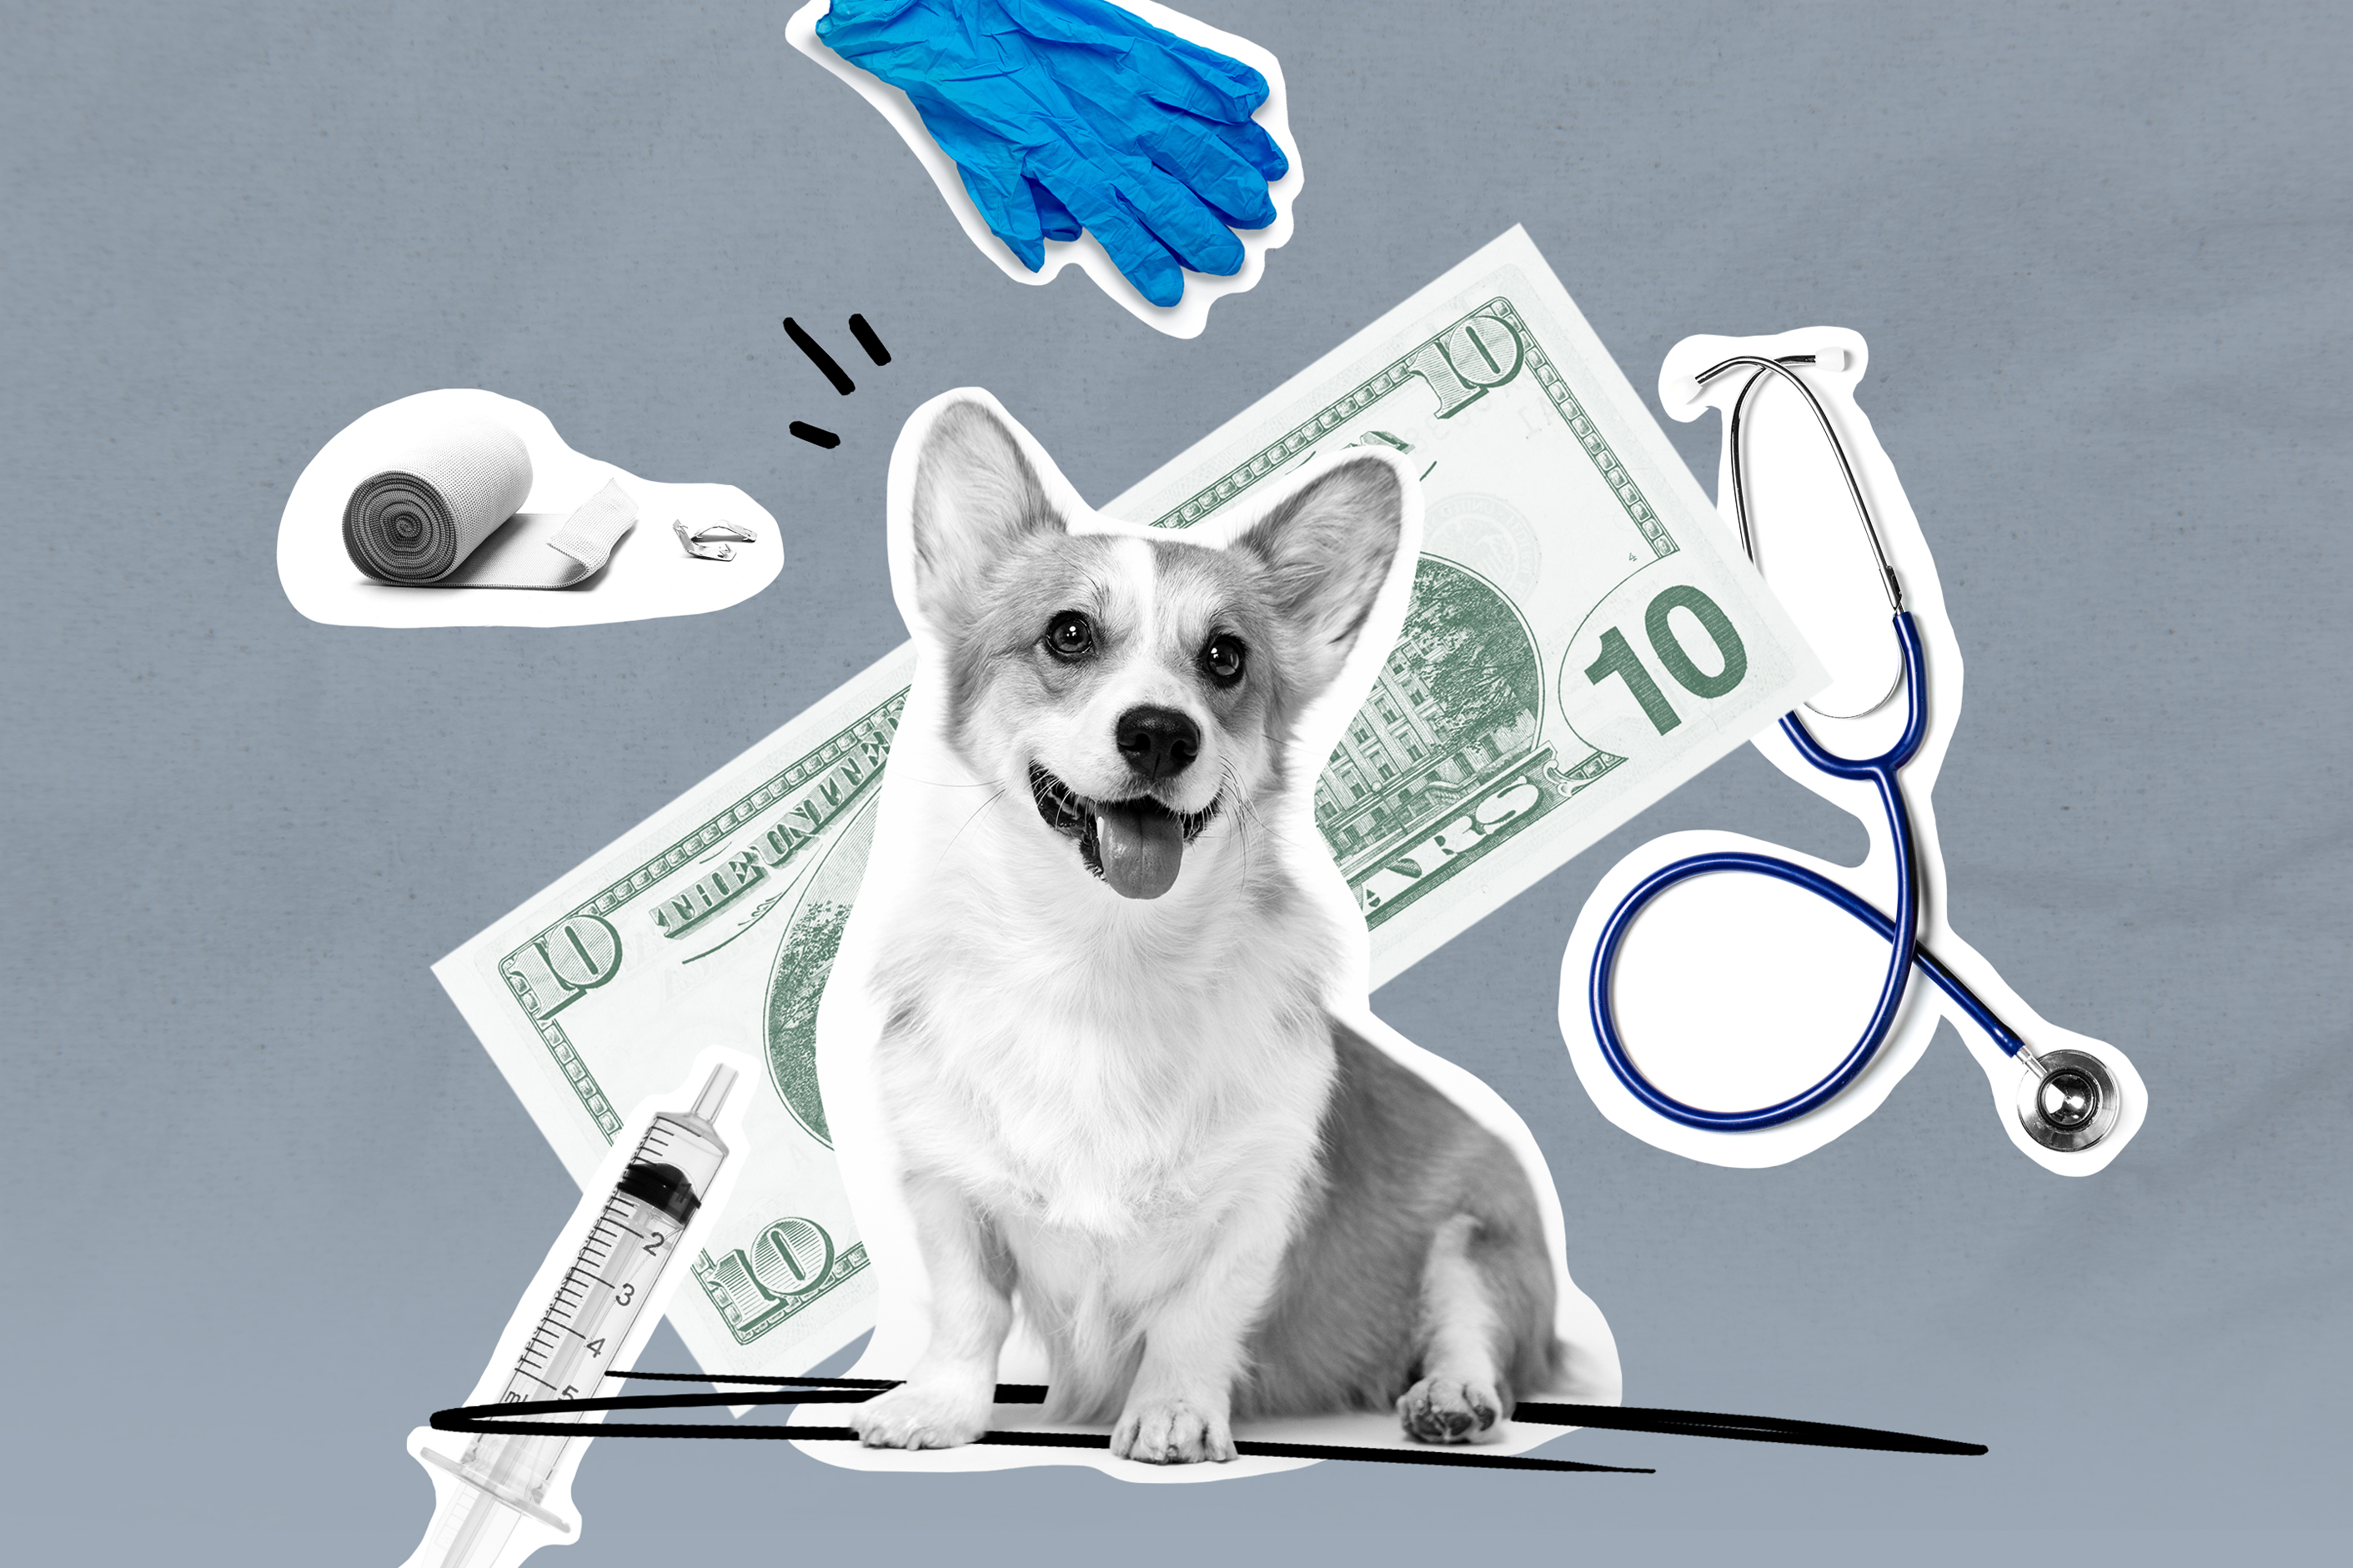 Picture of a dog with background containing $10 note, gloves, band aid, syringe, and stethoscope